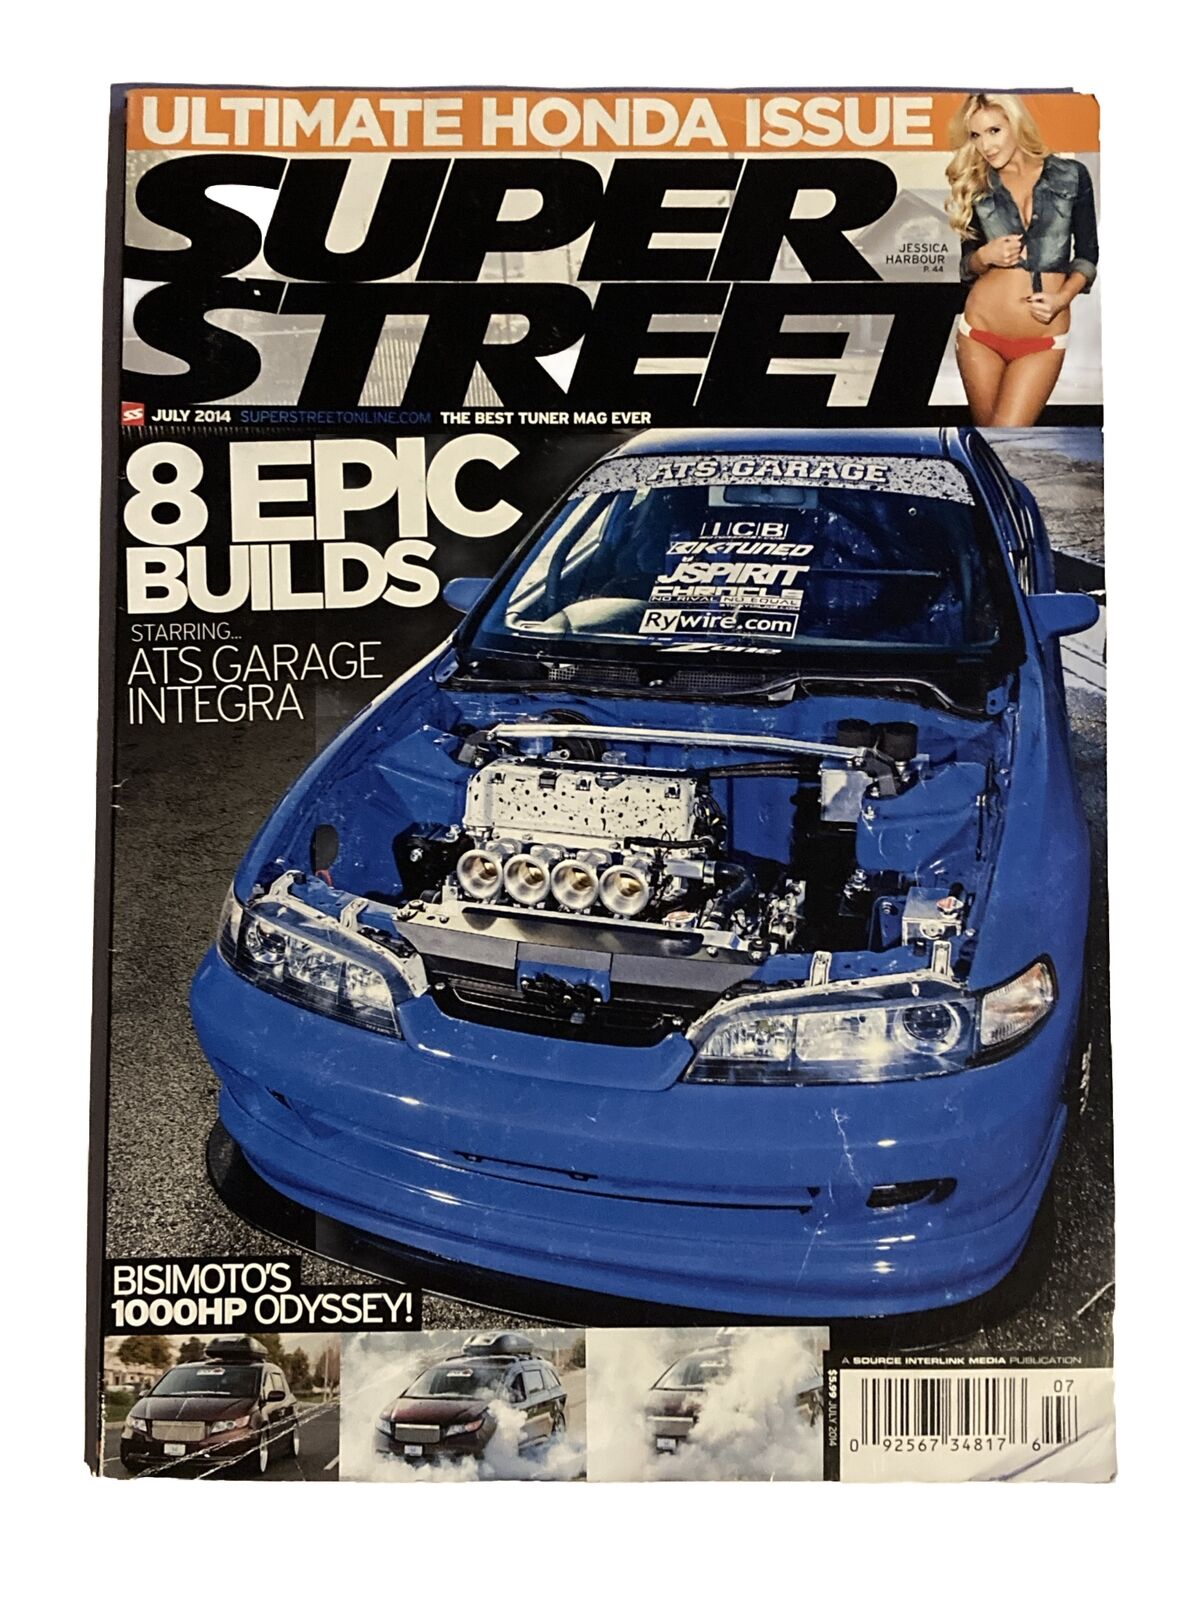 Super Street Magazine July 2014 - The Ultimate Honda Issue - Excellent Condition